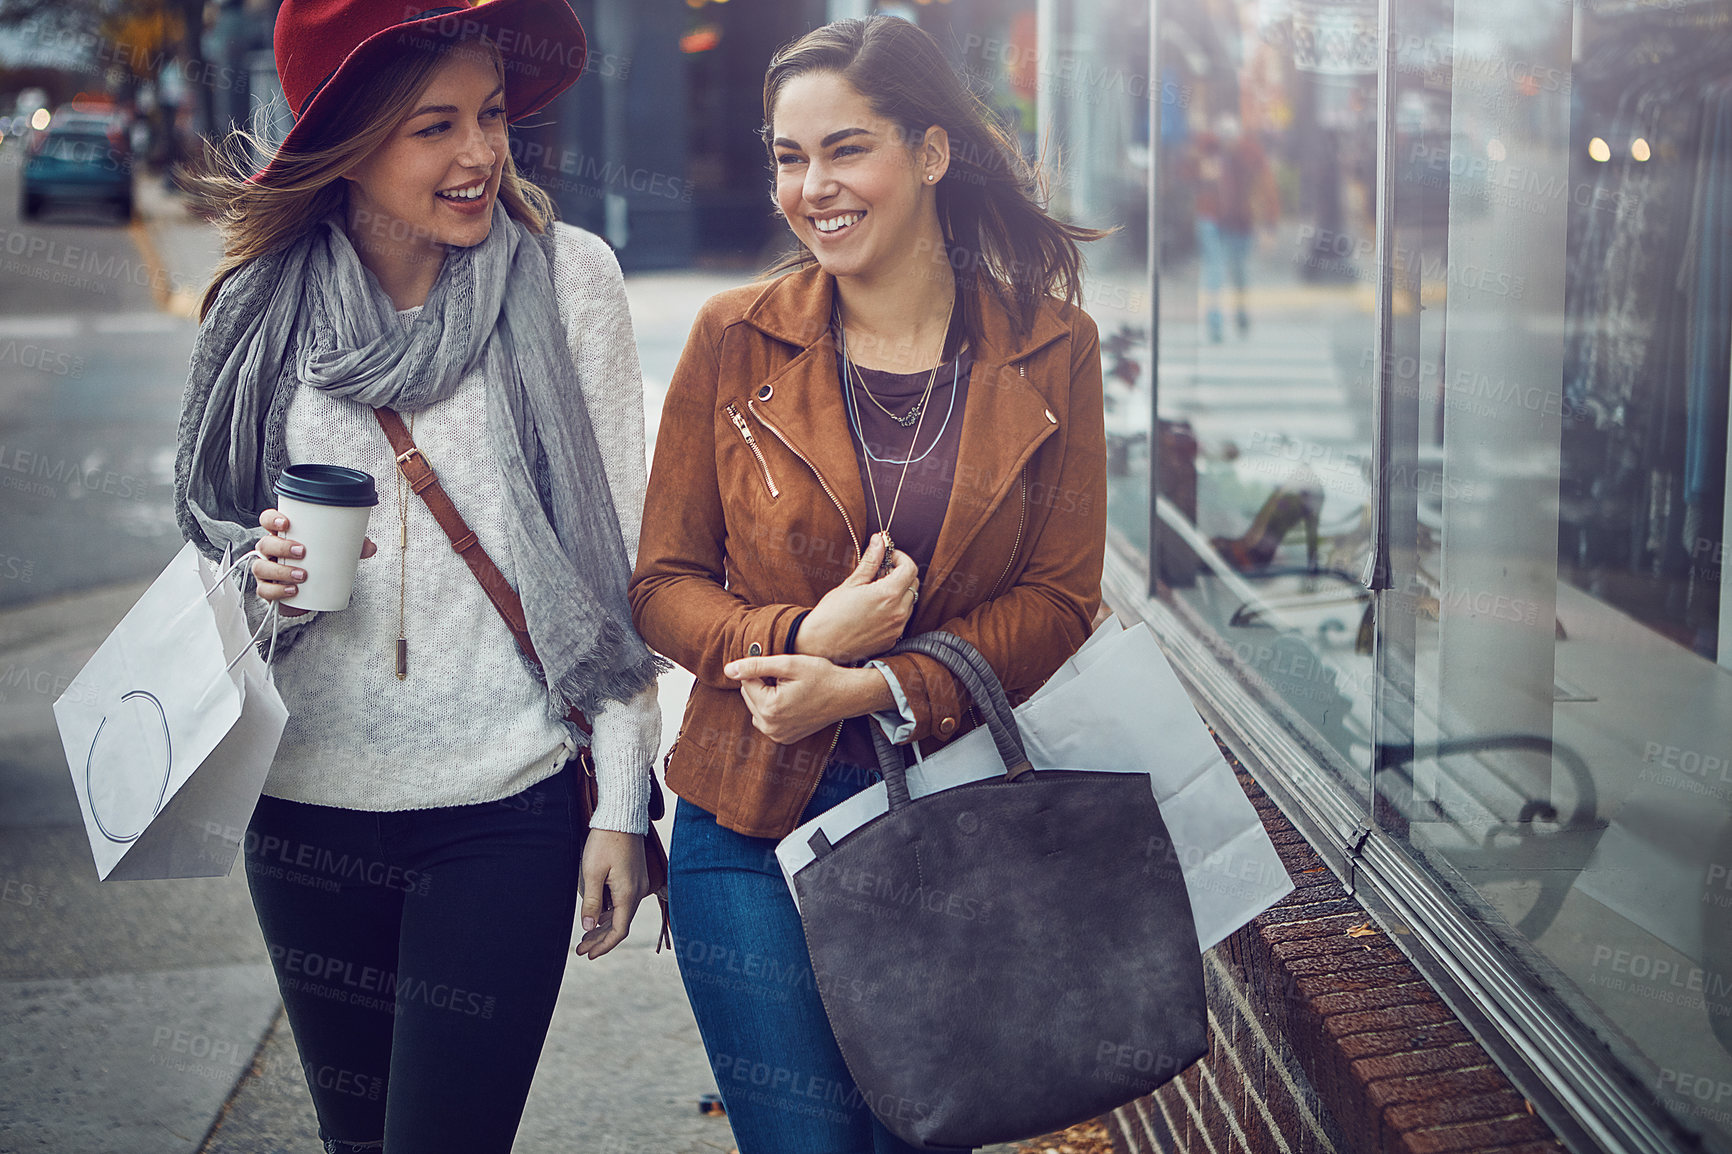 Buy stock photo Cropped shot of two young girlfriends walking around downtown while on a shopping spree